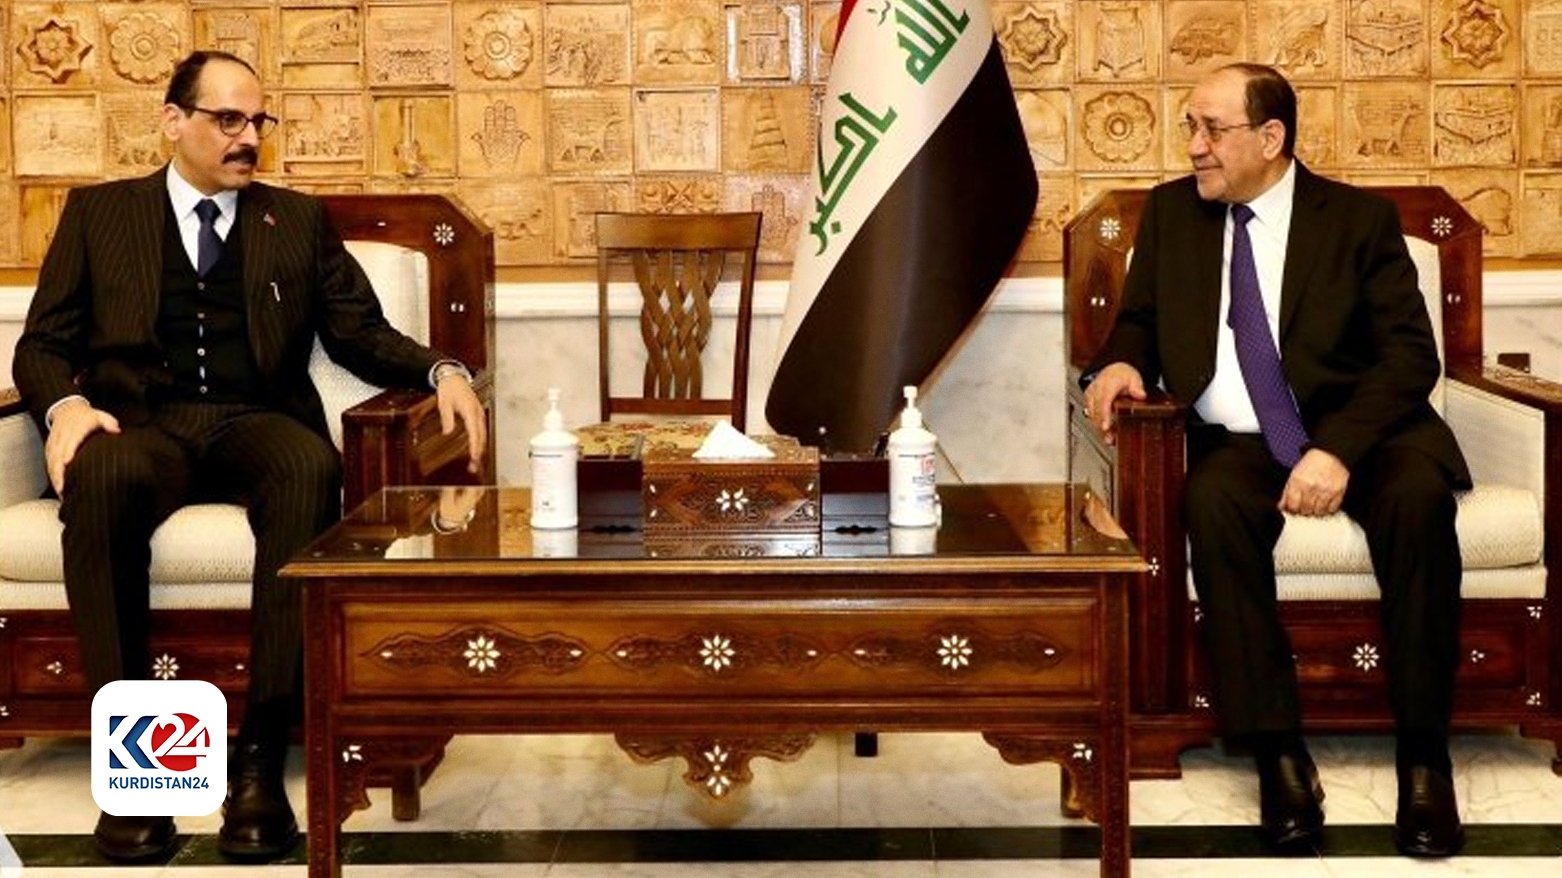 Turkish Intelligence Chief's Historic Iraq Visit Sparks Talks on Bilateral Relations and Security